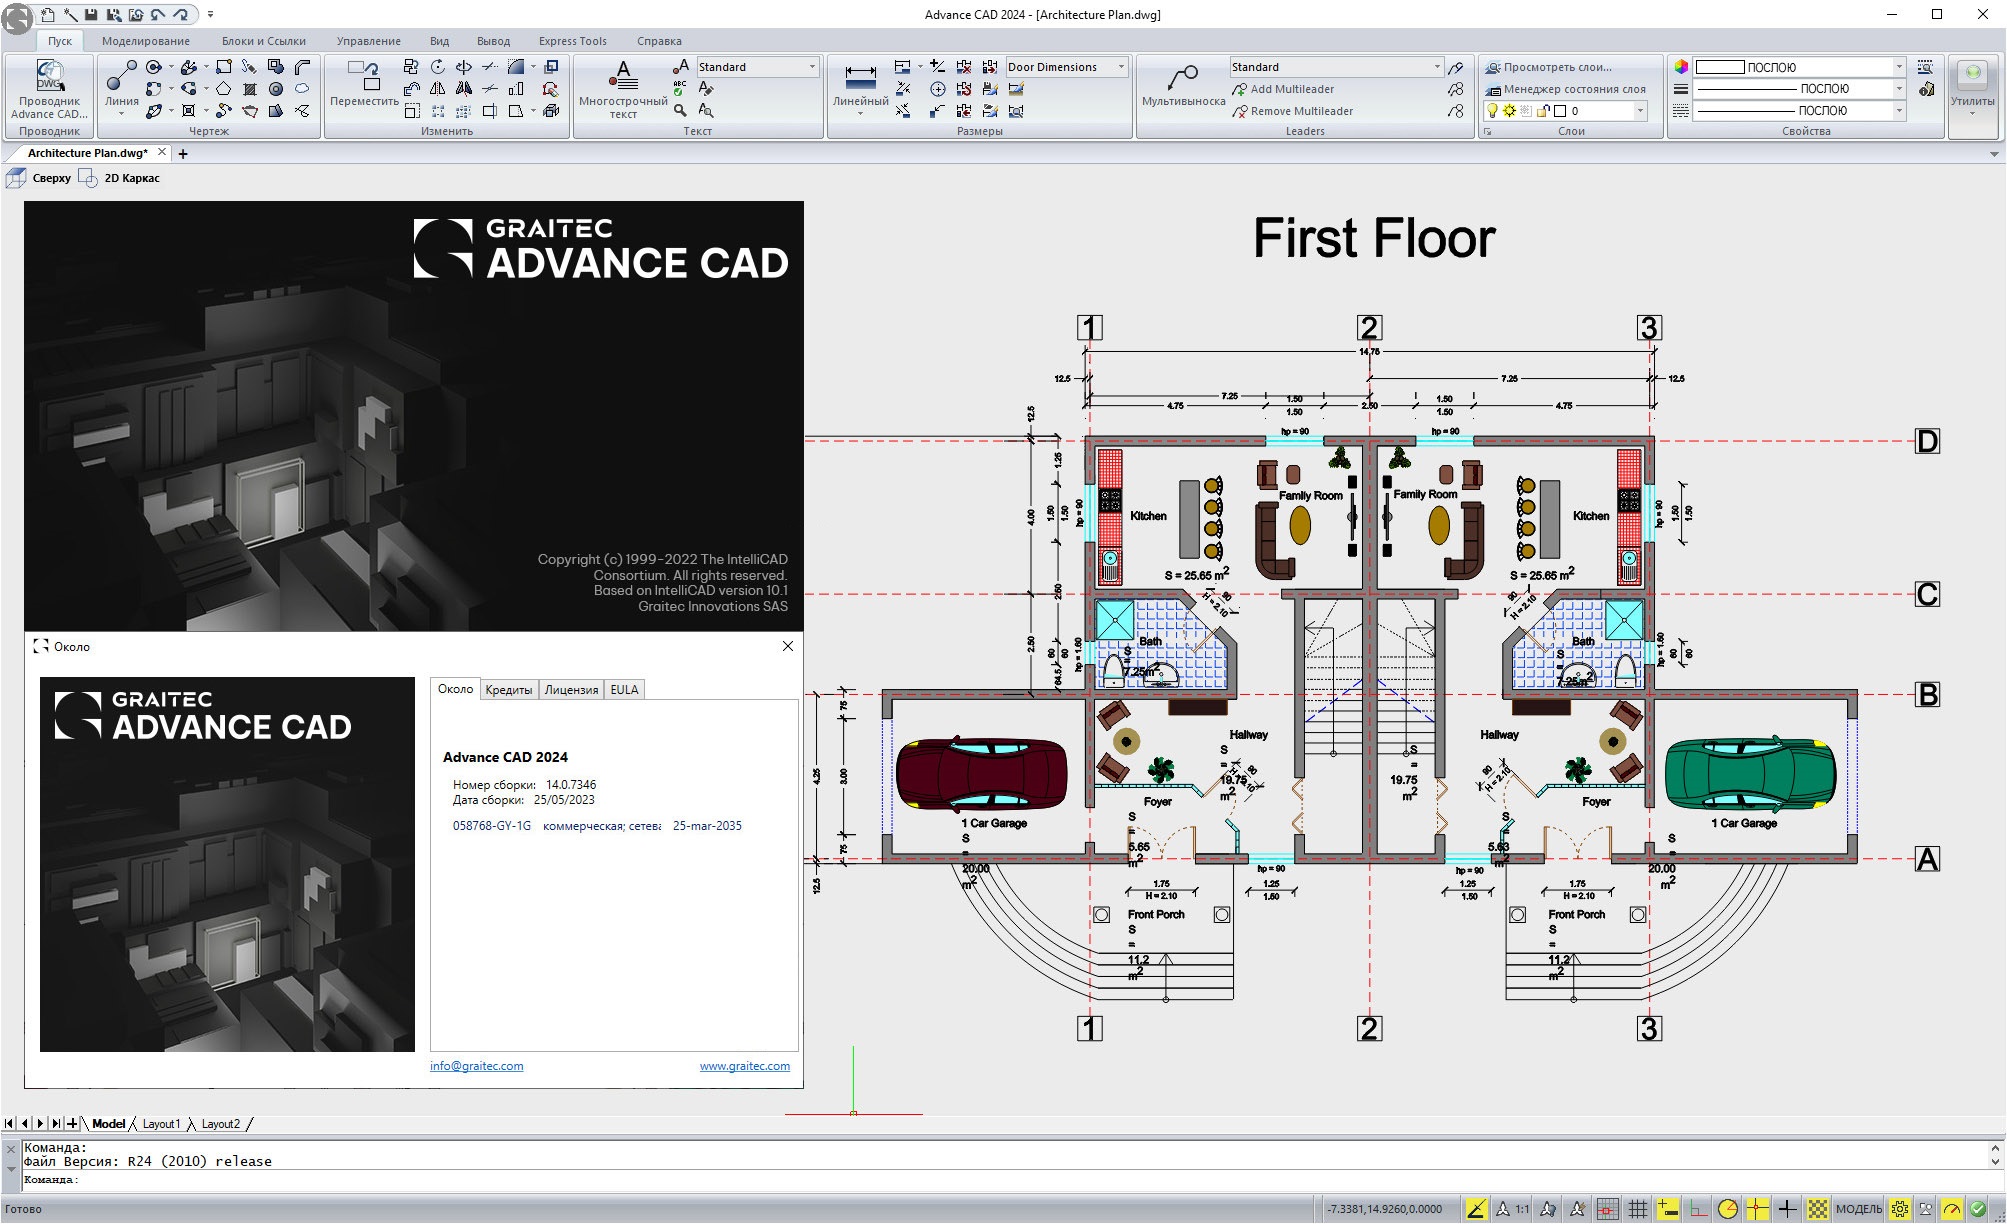 Working with Graitec Advance CAD 2024.0 build 14.0.7346 full license